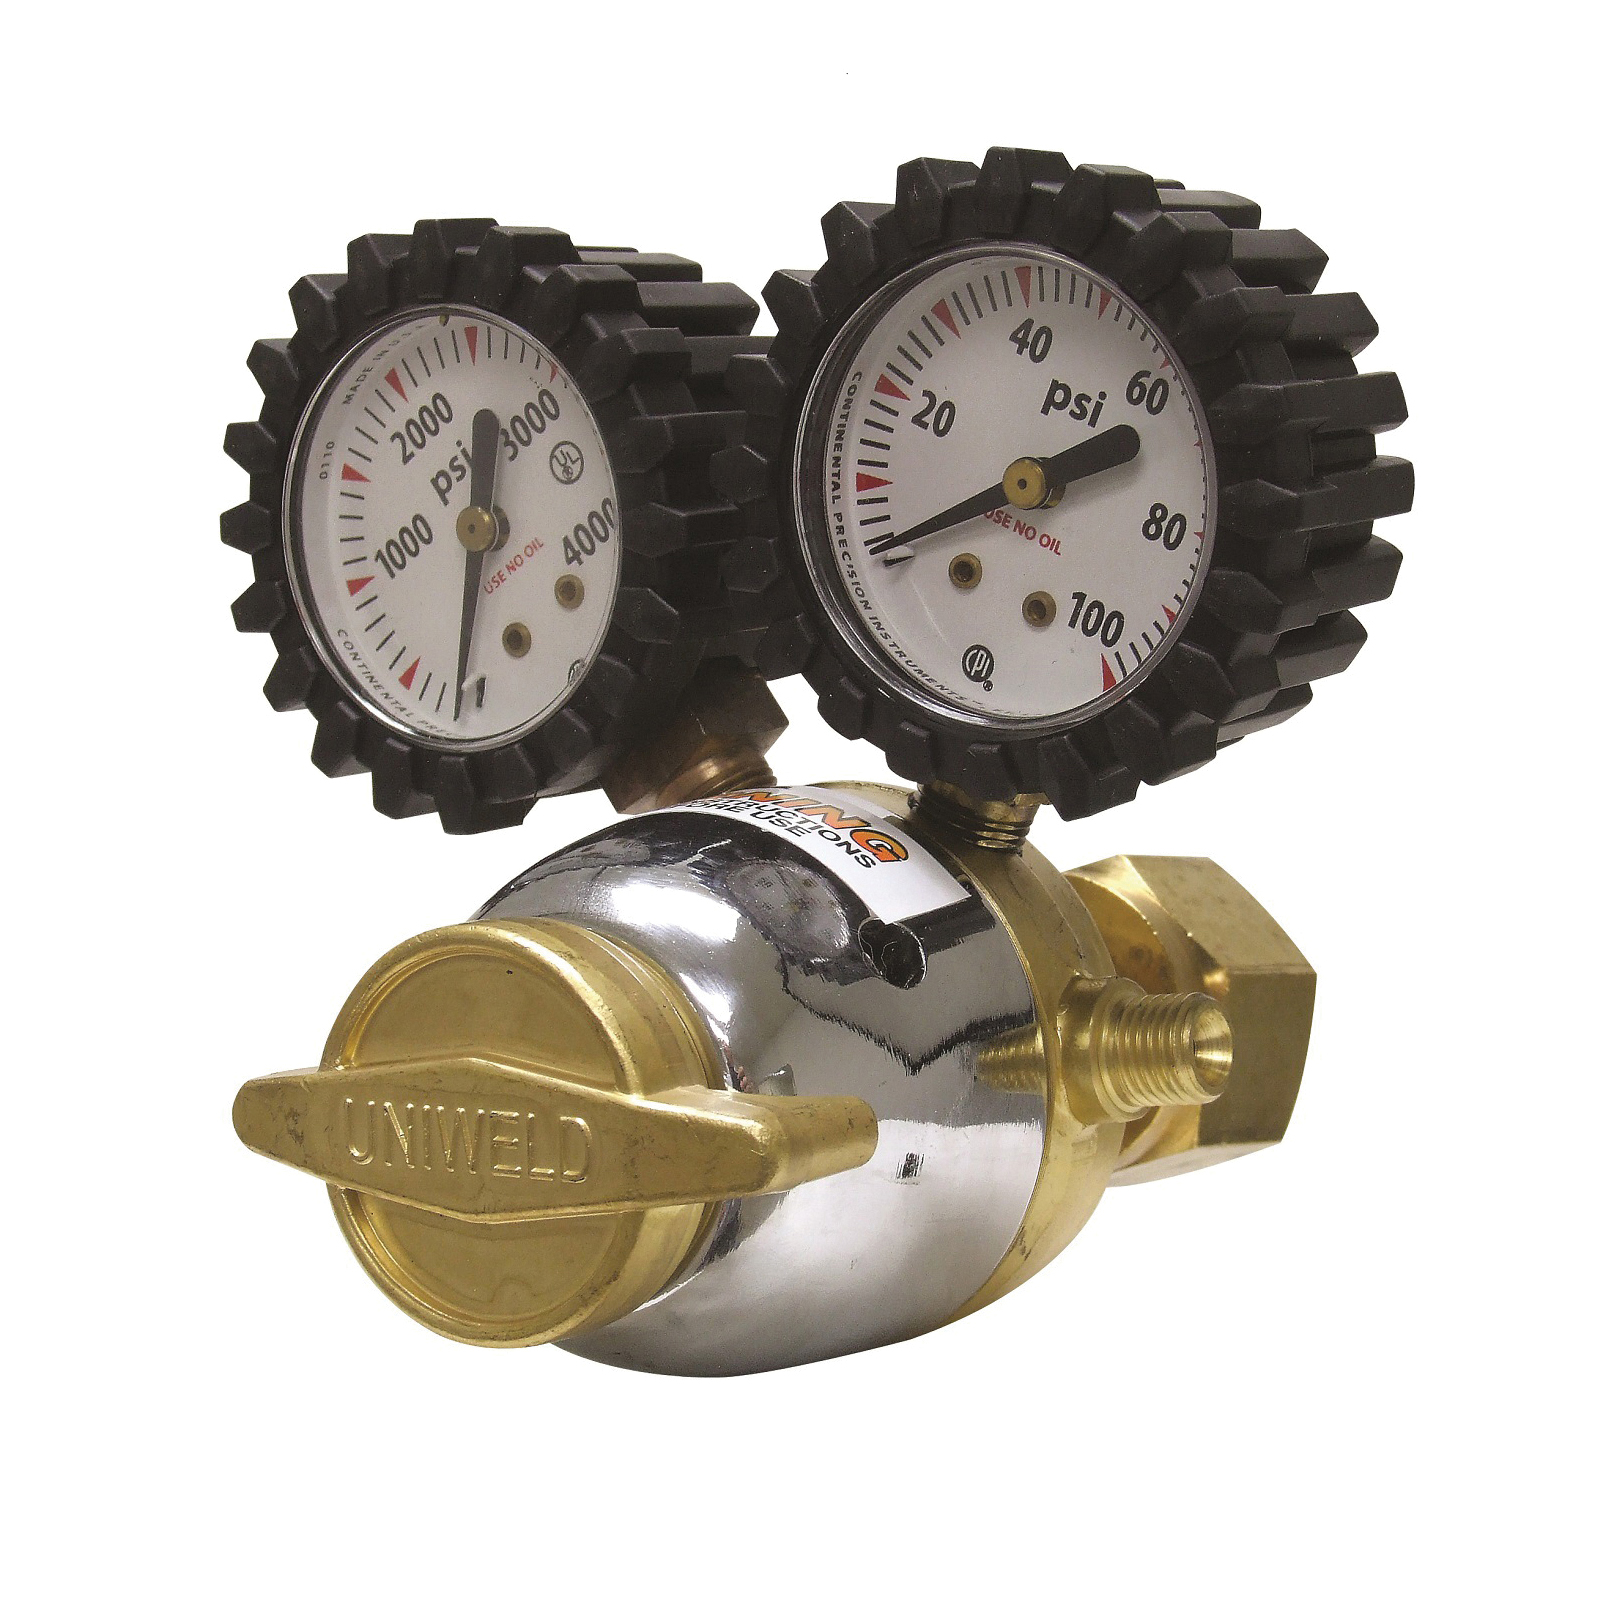 UNIWELD® RMC Regulator, Acetylene Gas, 1-Stage, 200 Inlet Connection, 3/8-24 Outlet Connection, 1-1/2 in Gauge